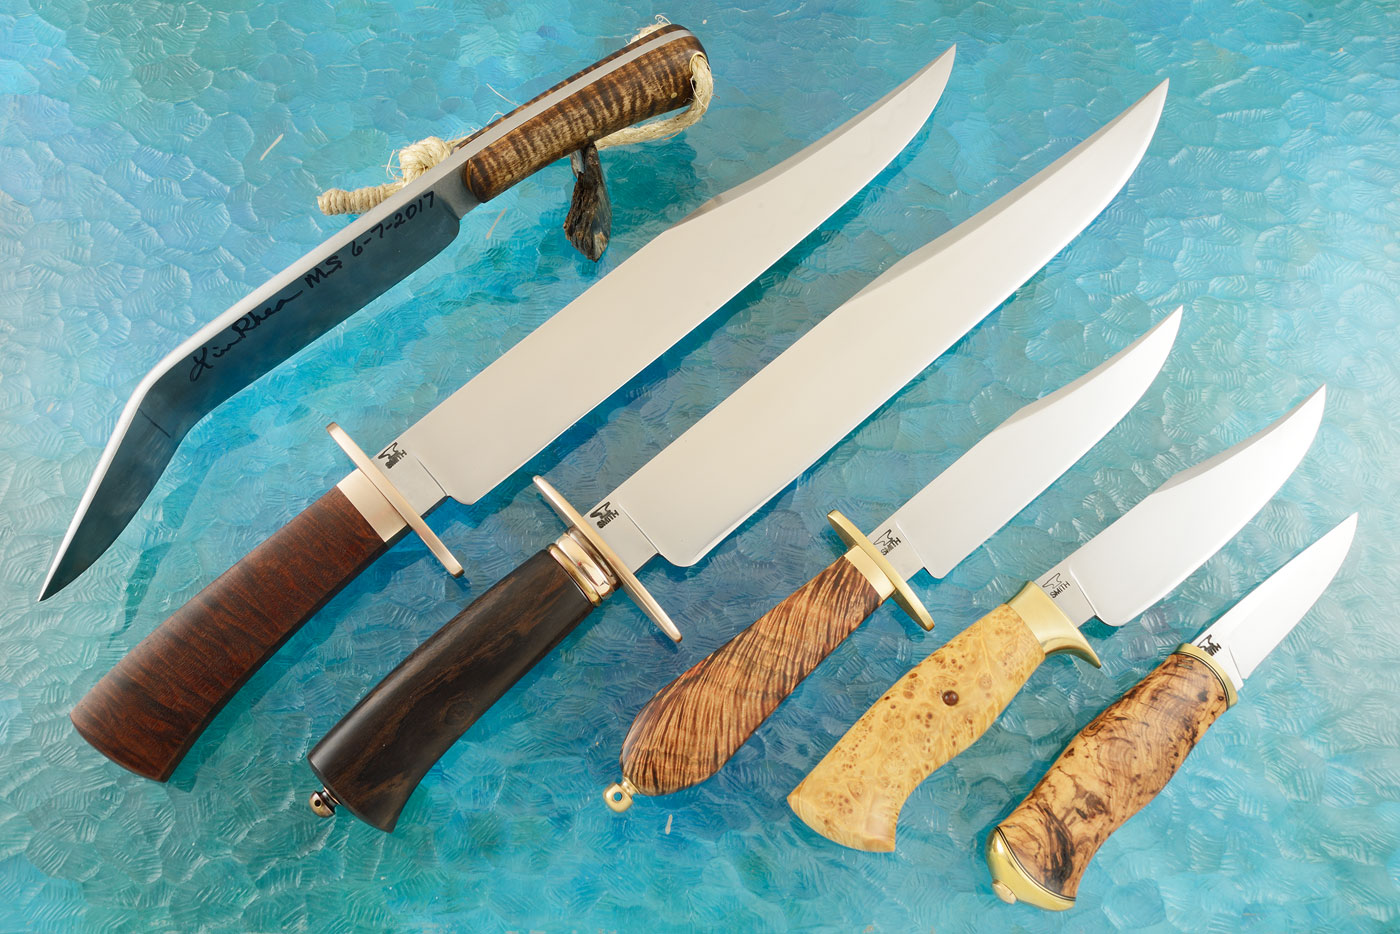 Journeyman Smith Test Set (5 Knives and Performance Test Blade)